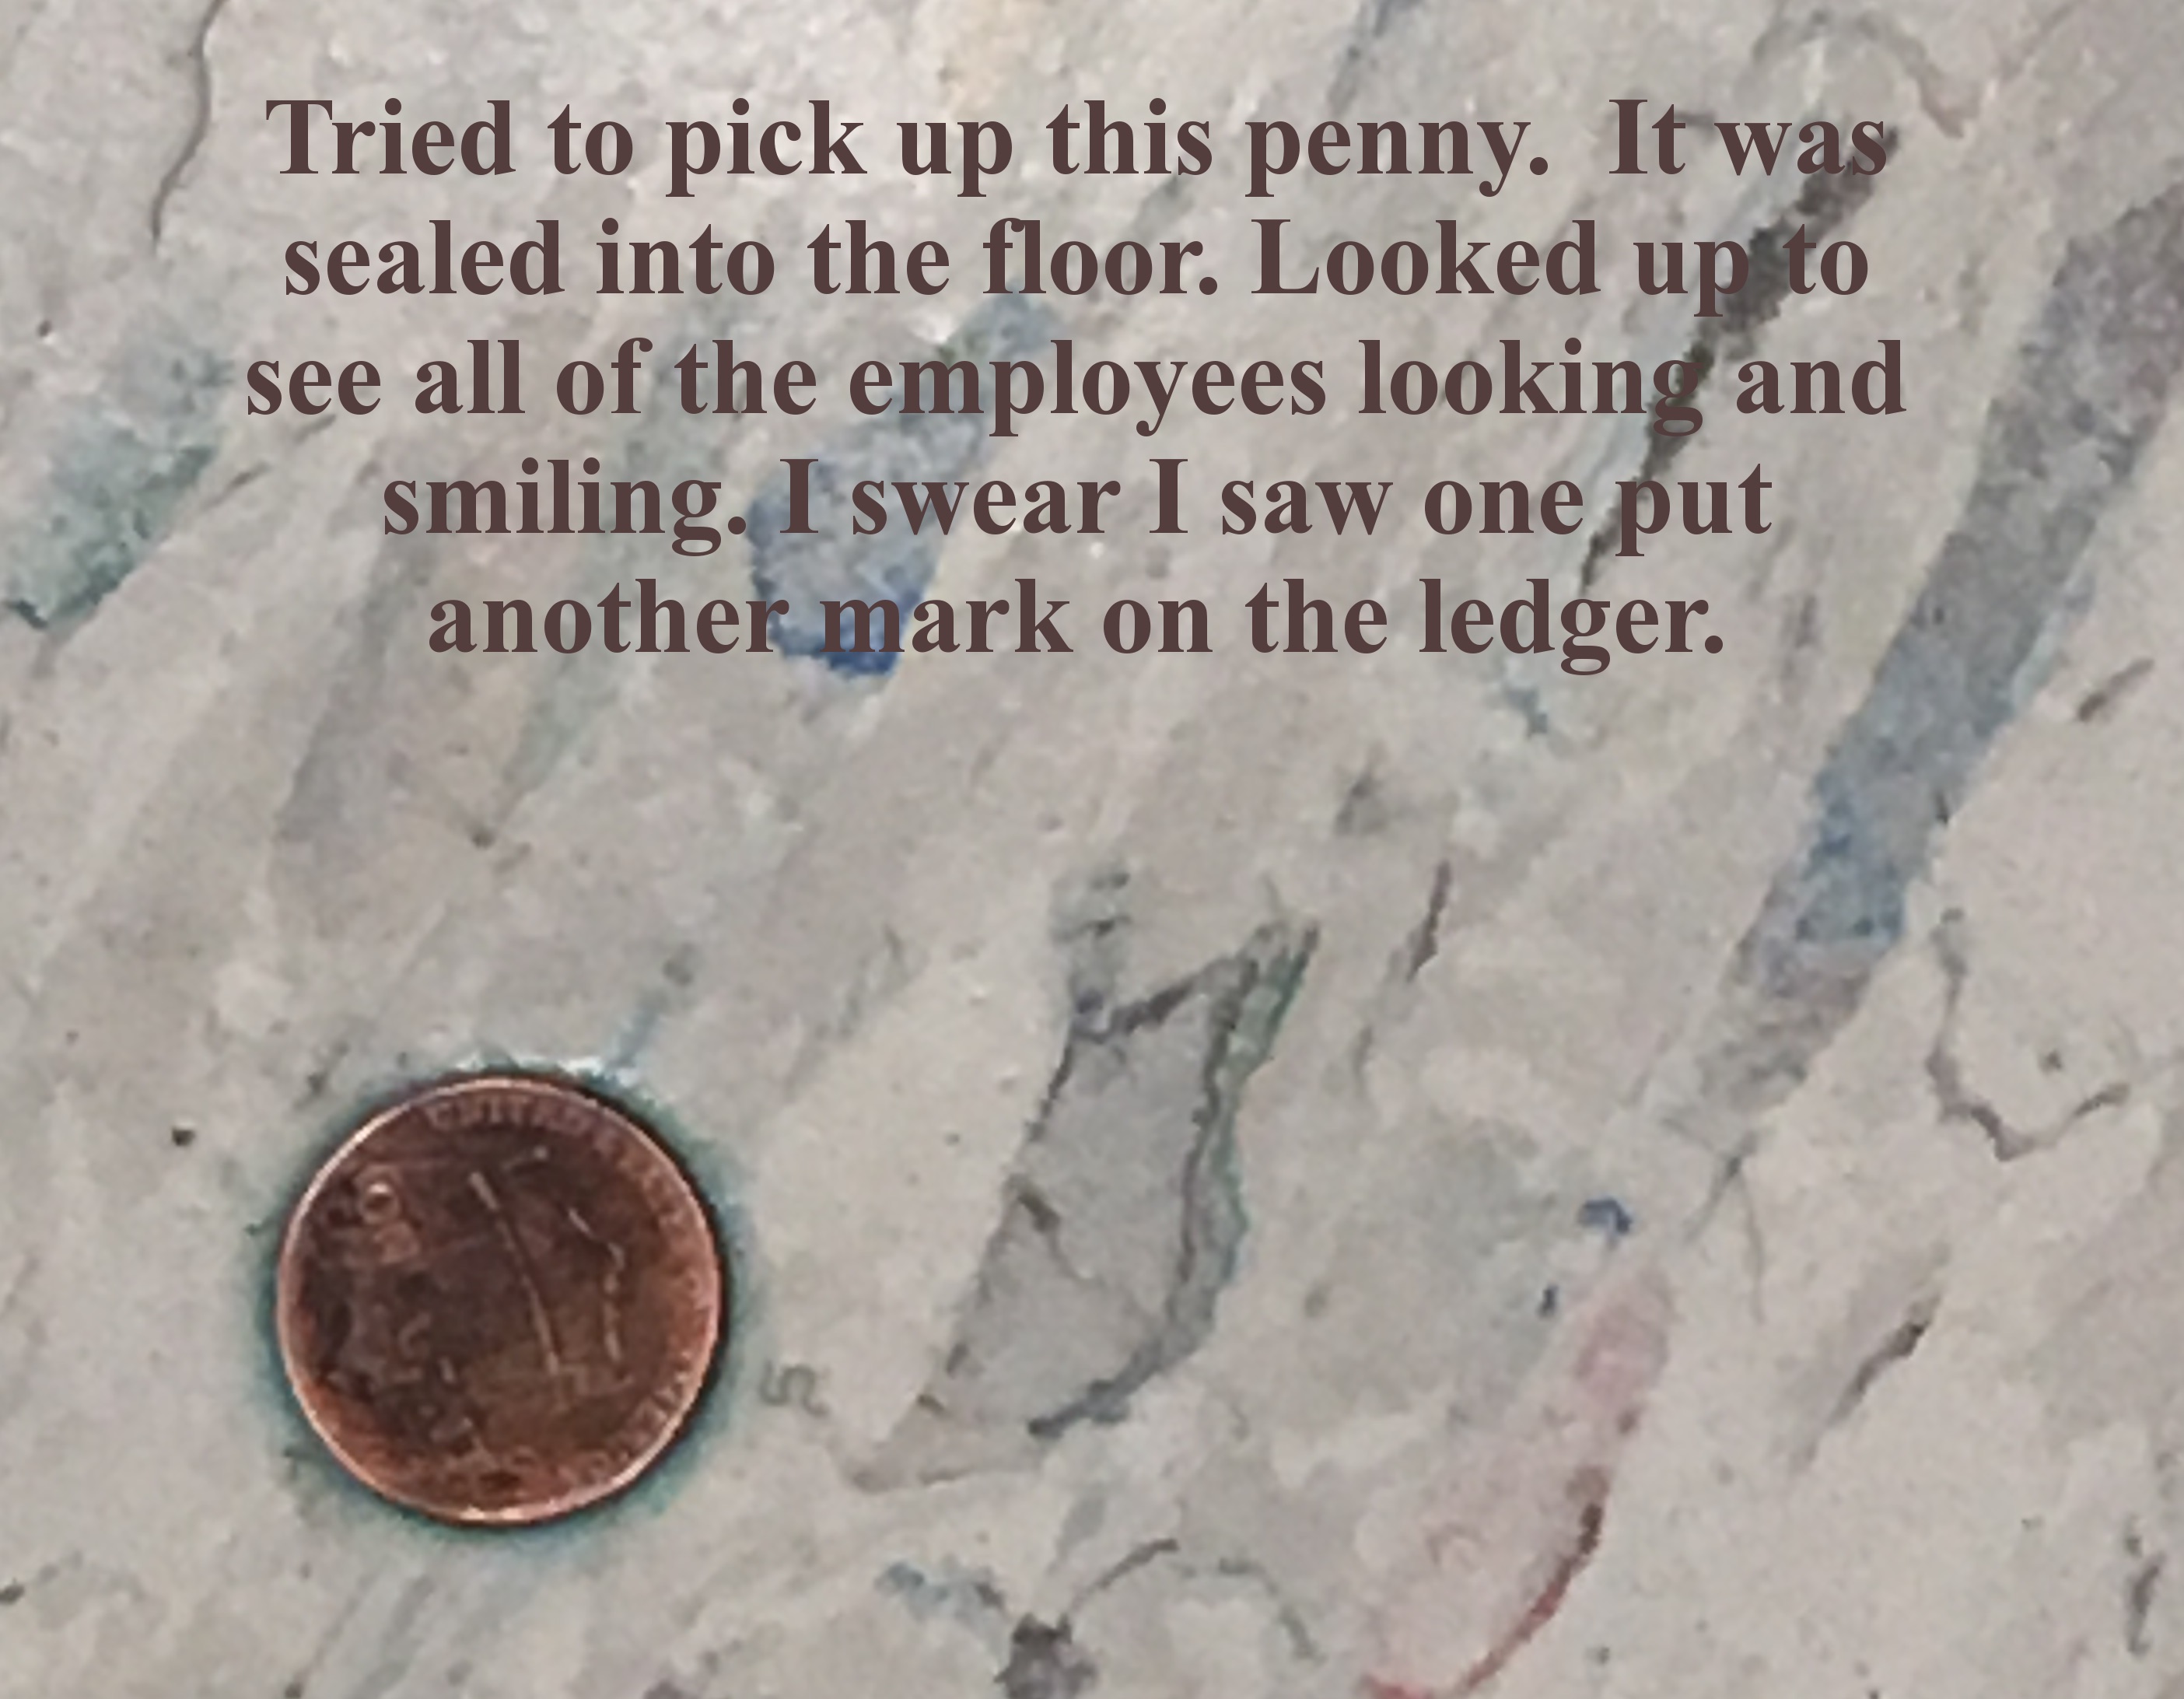 soil - Tried to pick up this penny. It was sealed into the floor. Looked up to see all of the employees looking and smiling. I swear I saw one put another mark on the ledger. in